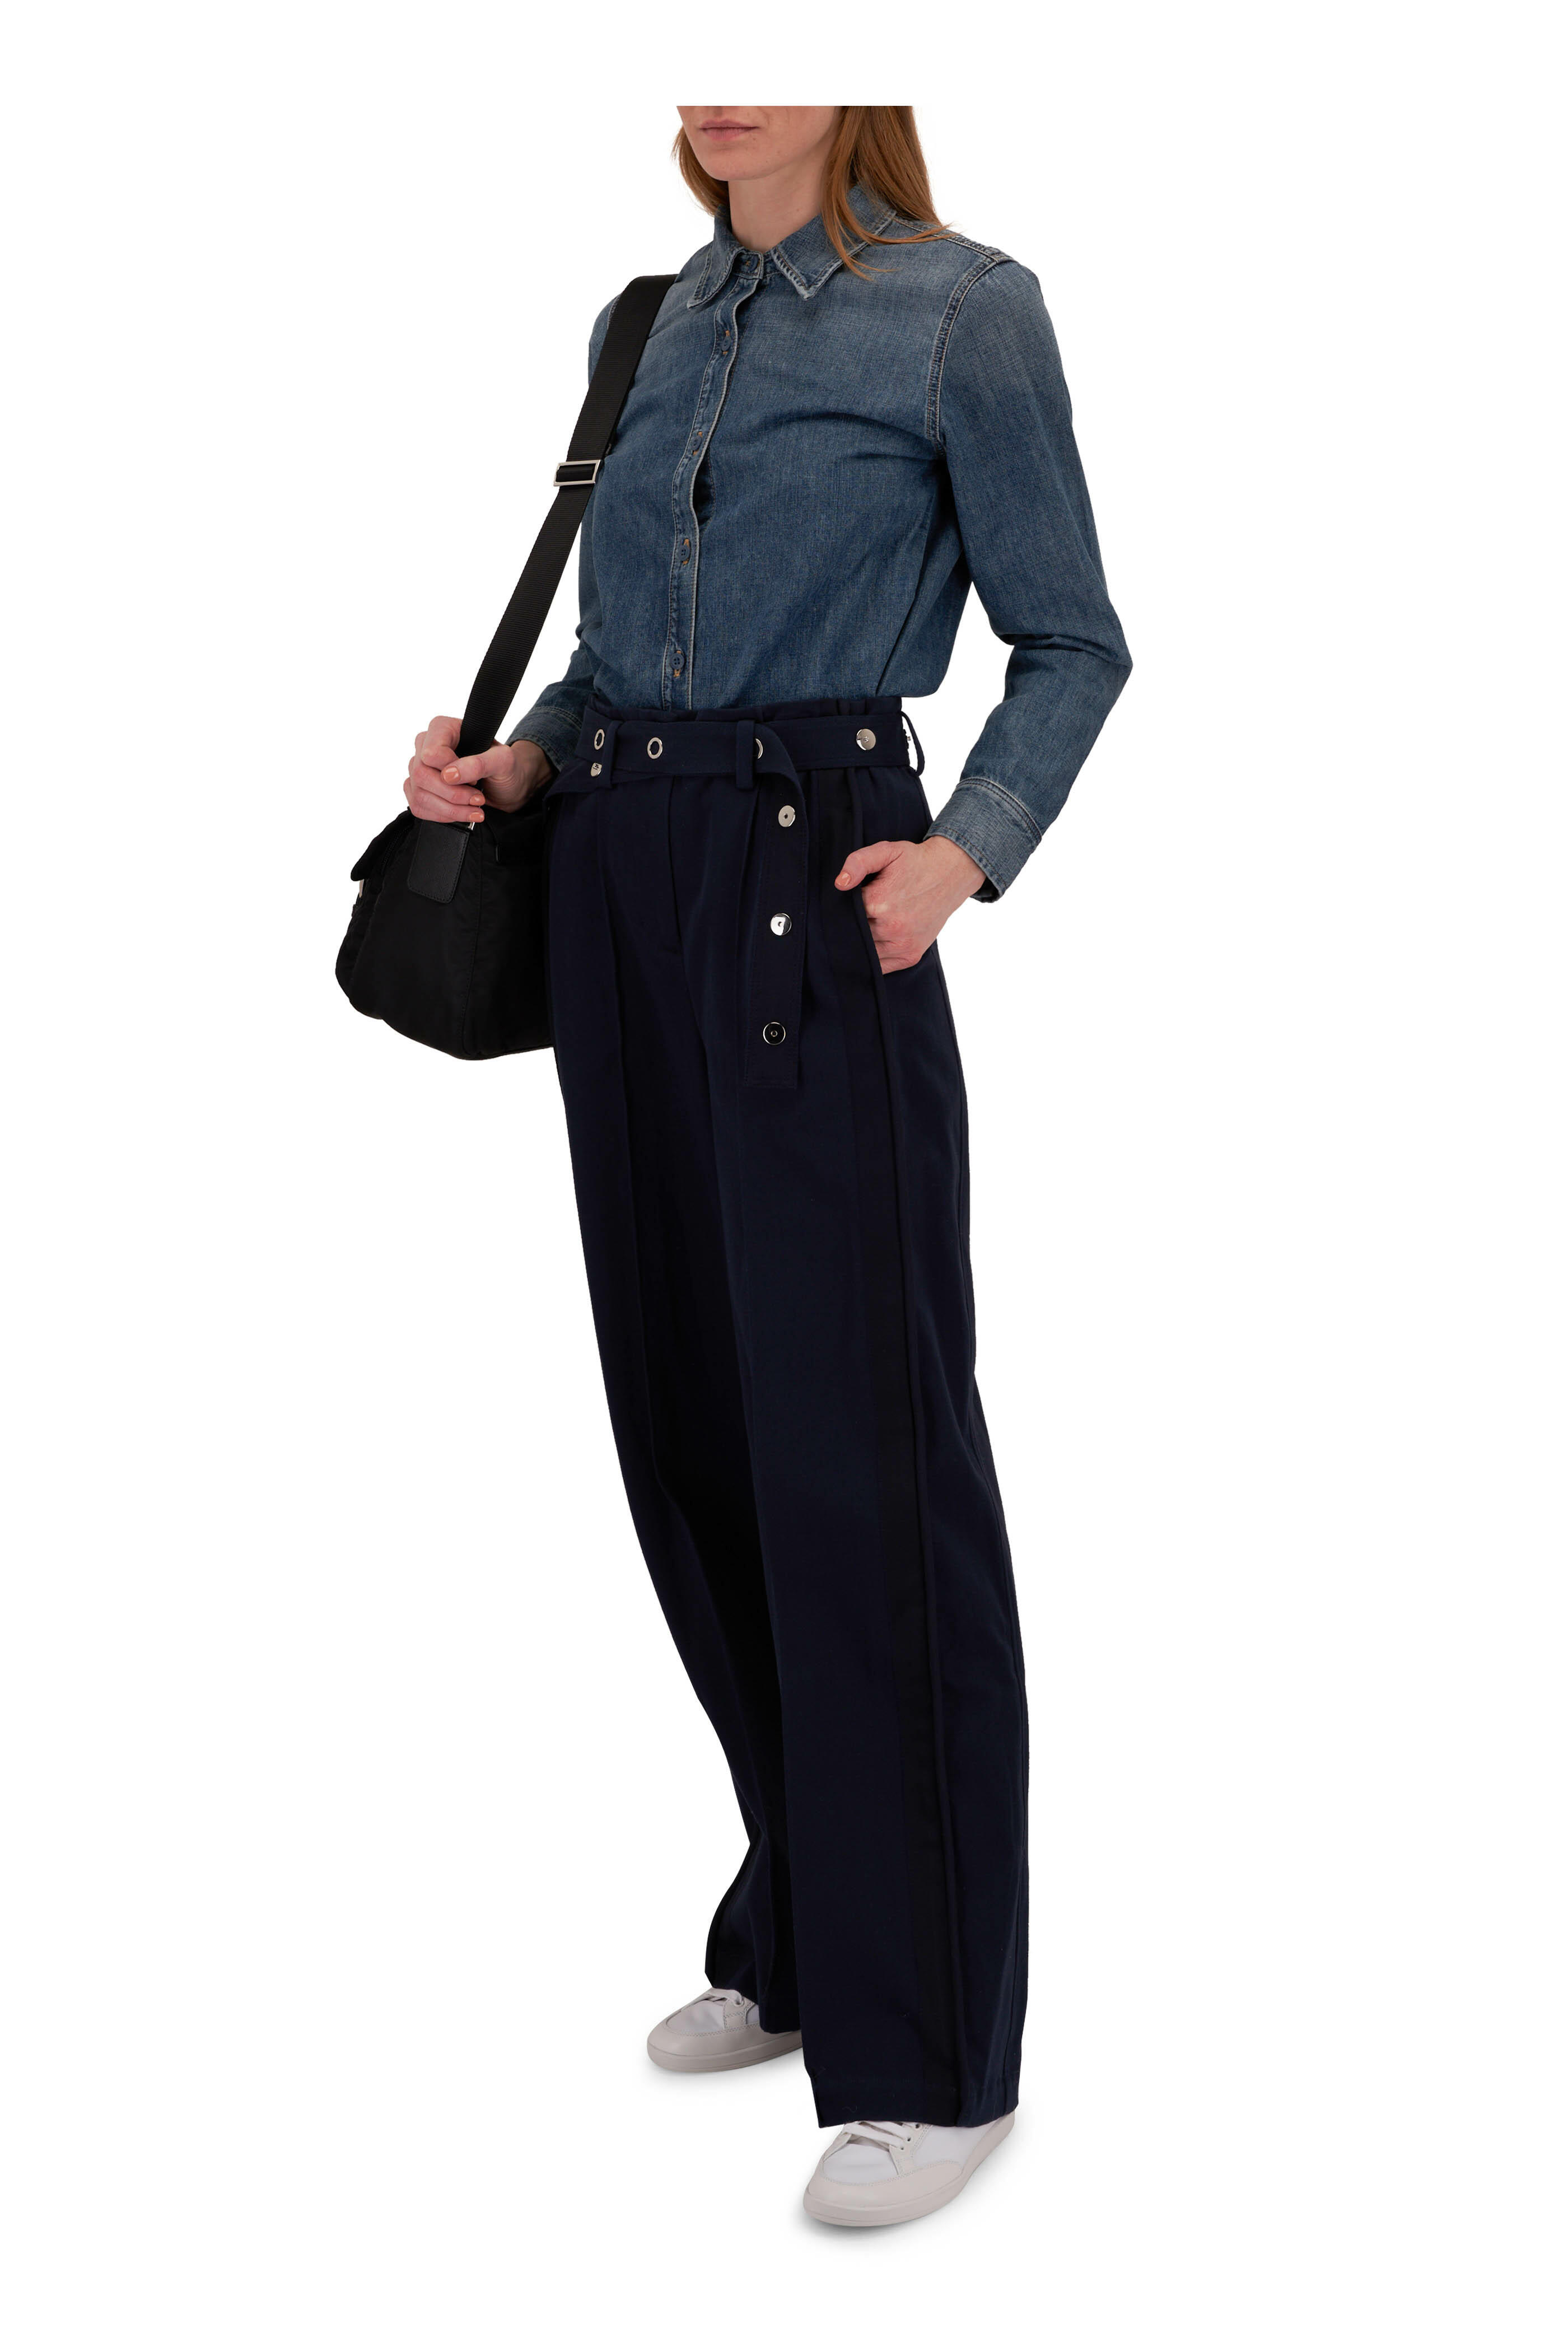 3.1 Phillip Lim - Midnight Belted Utility Pant